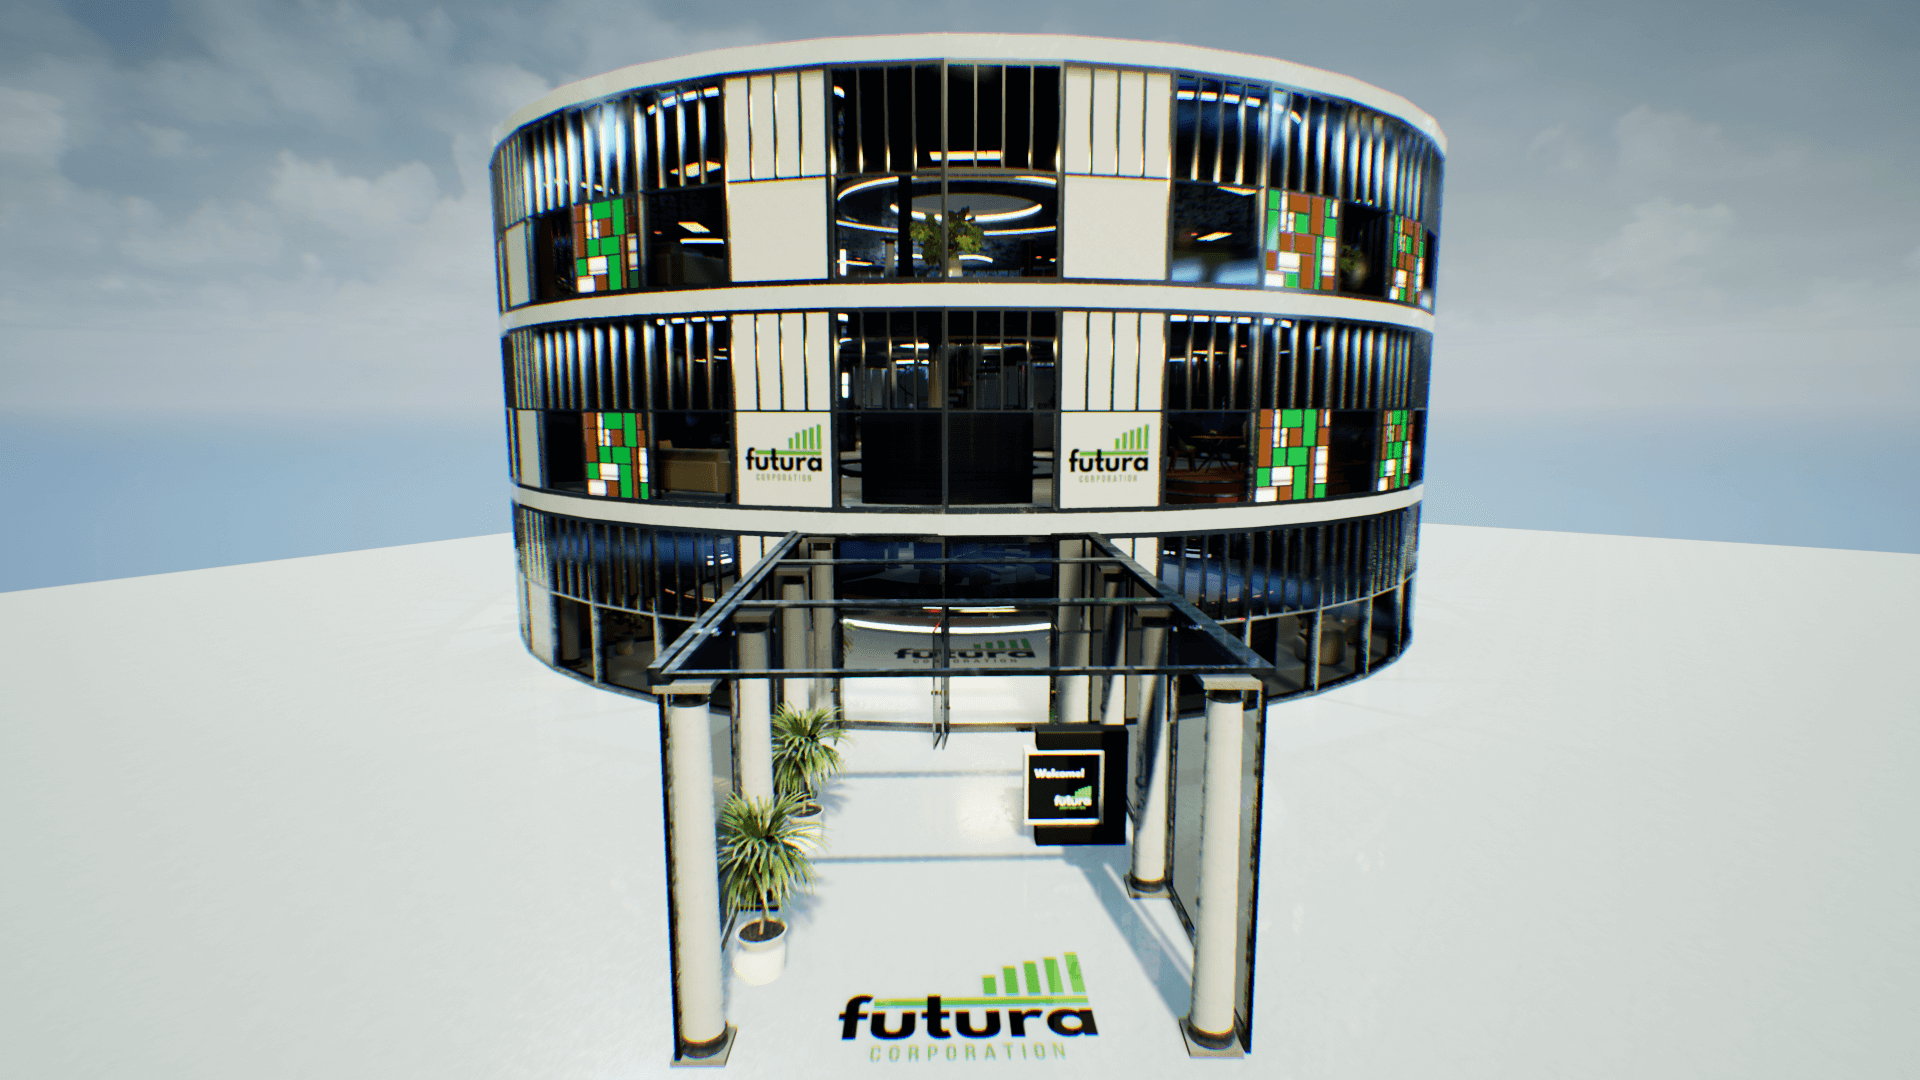 An image showing Corporate Building Futura asset pack, created with Unreal Engine.